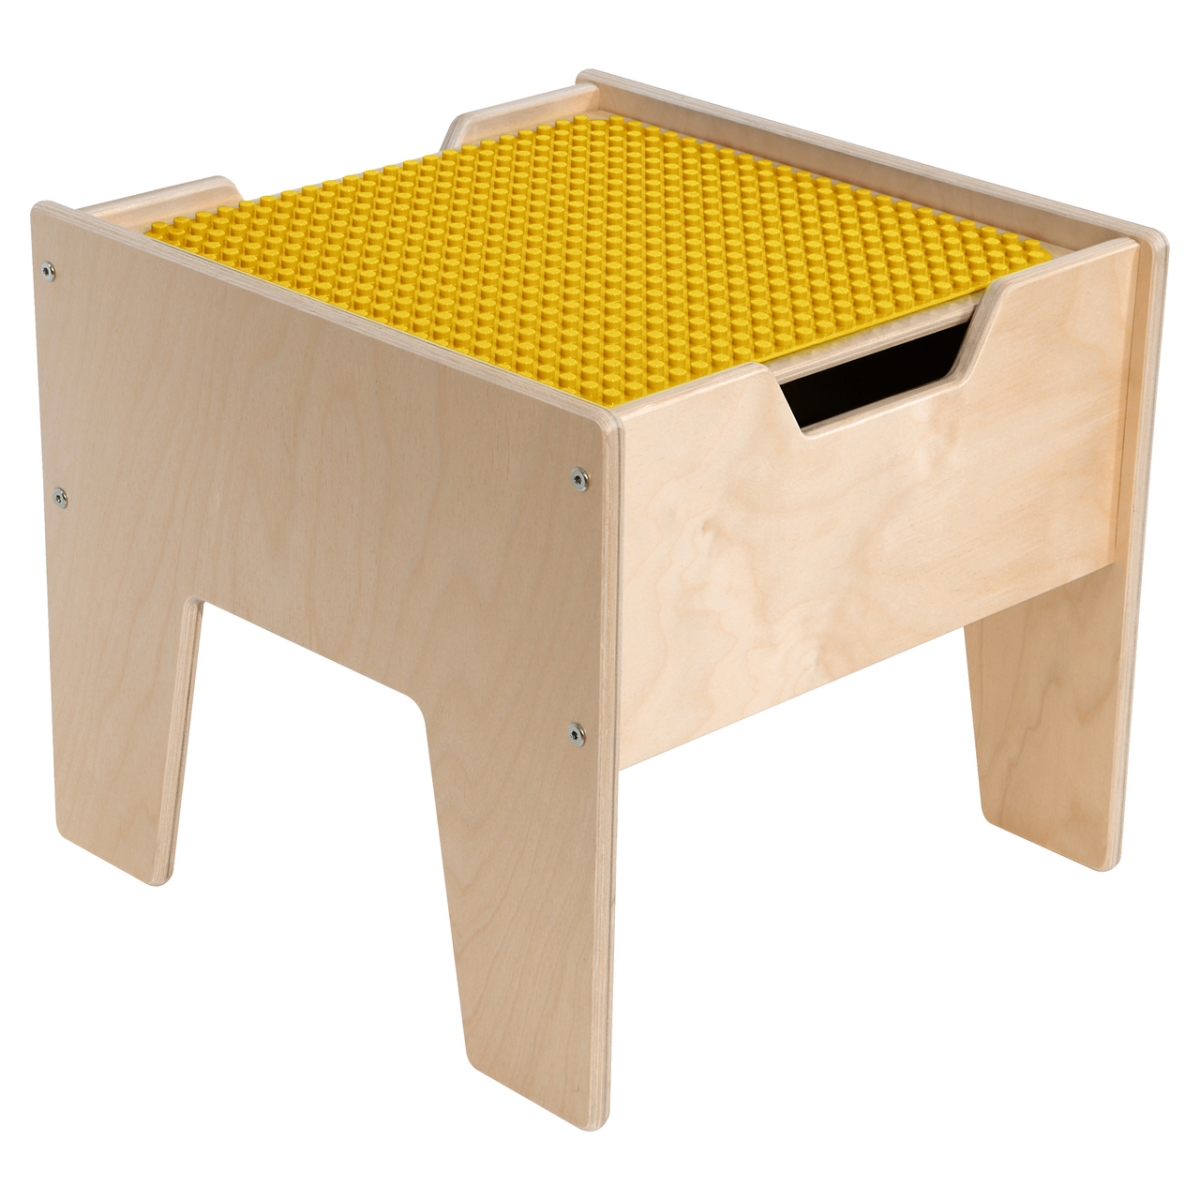 C991300f-py 2-n-1 Activity Table With Yellow Duplo Compatible Top - Assembled